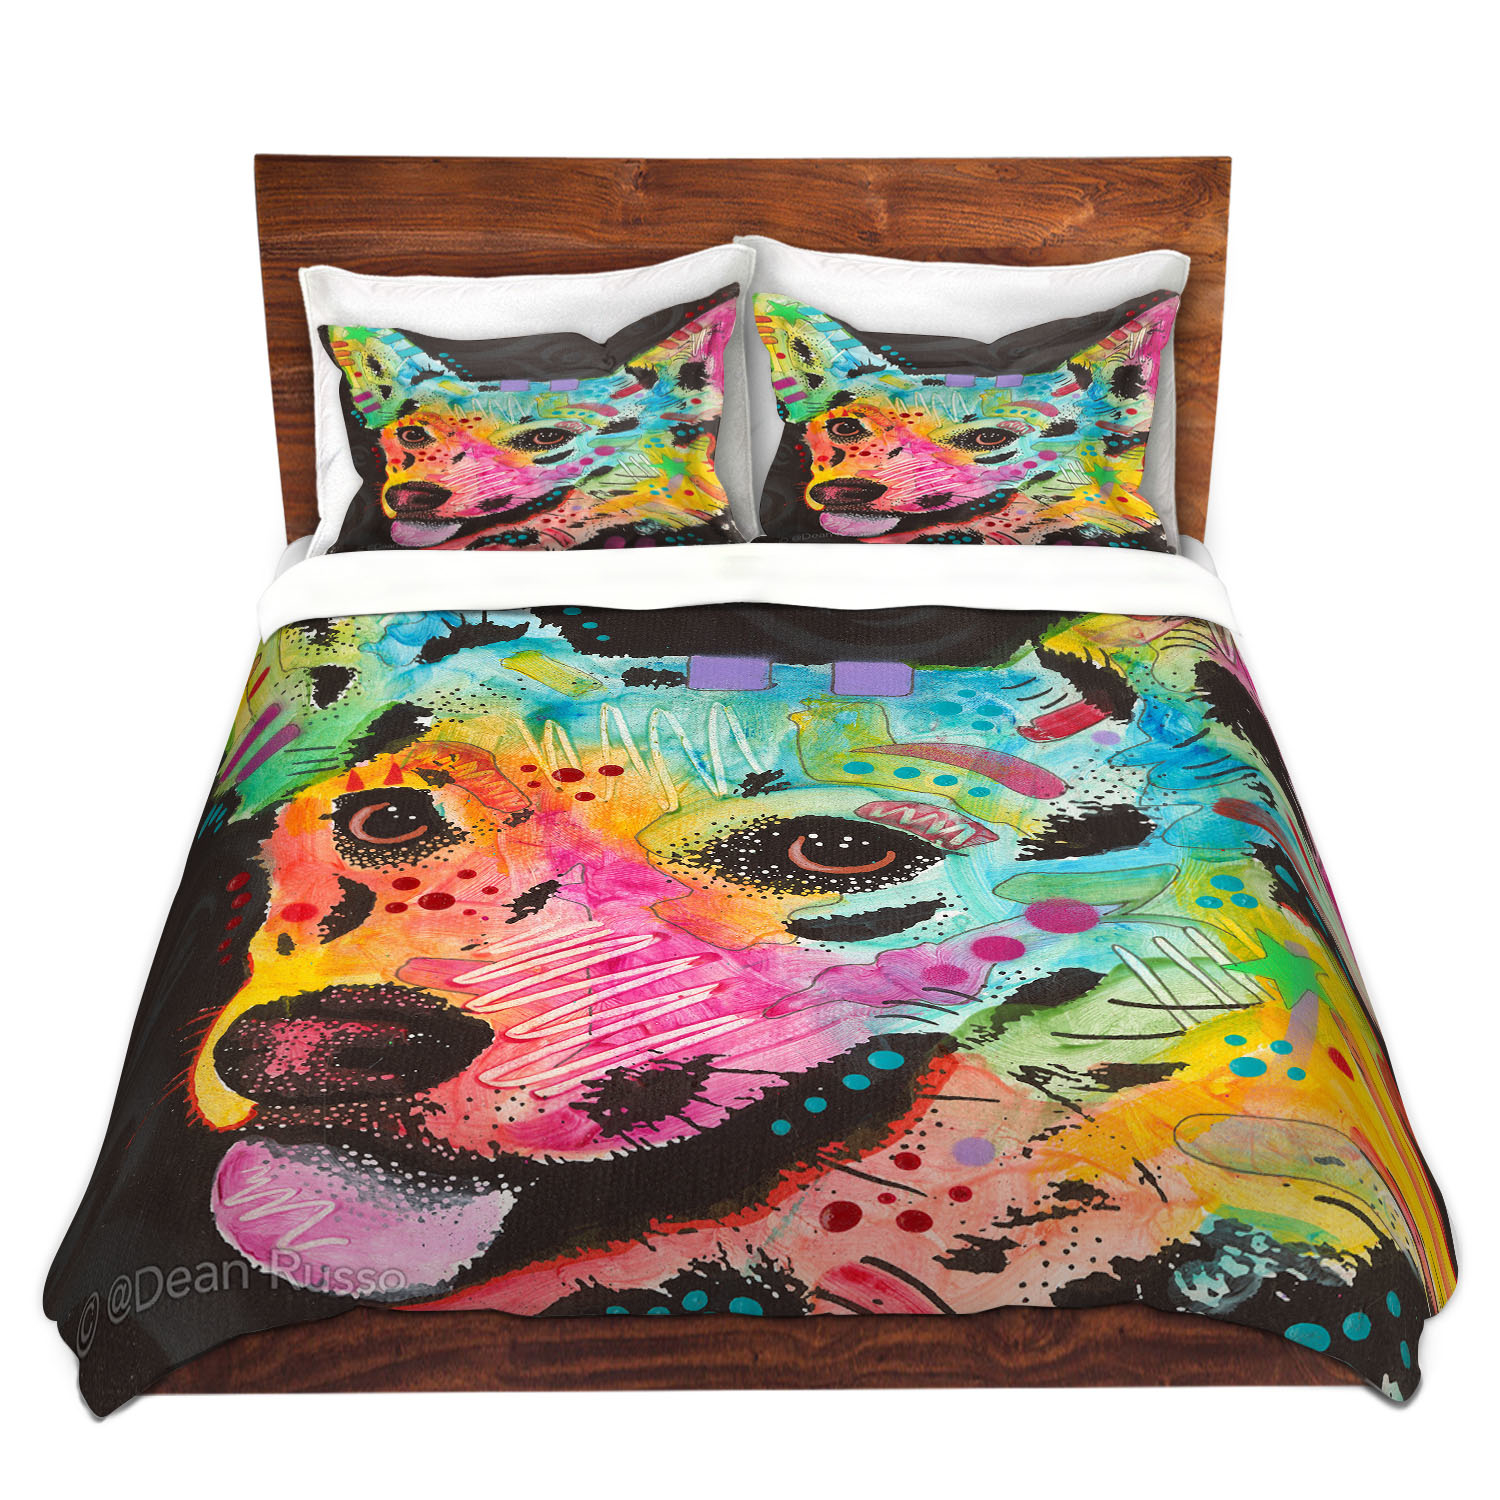 Dianoche Microfiber Duvet Covers By Dean Russo - Collie Dog 4